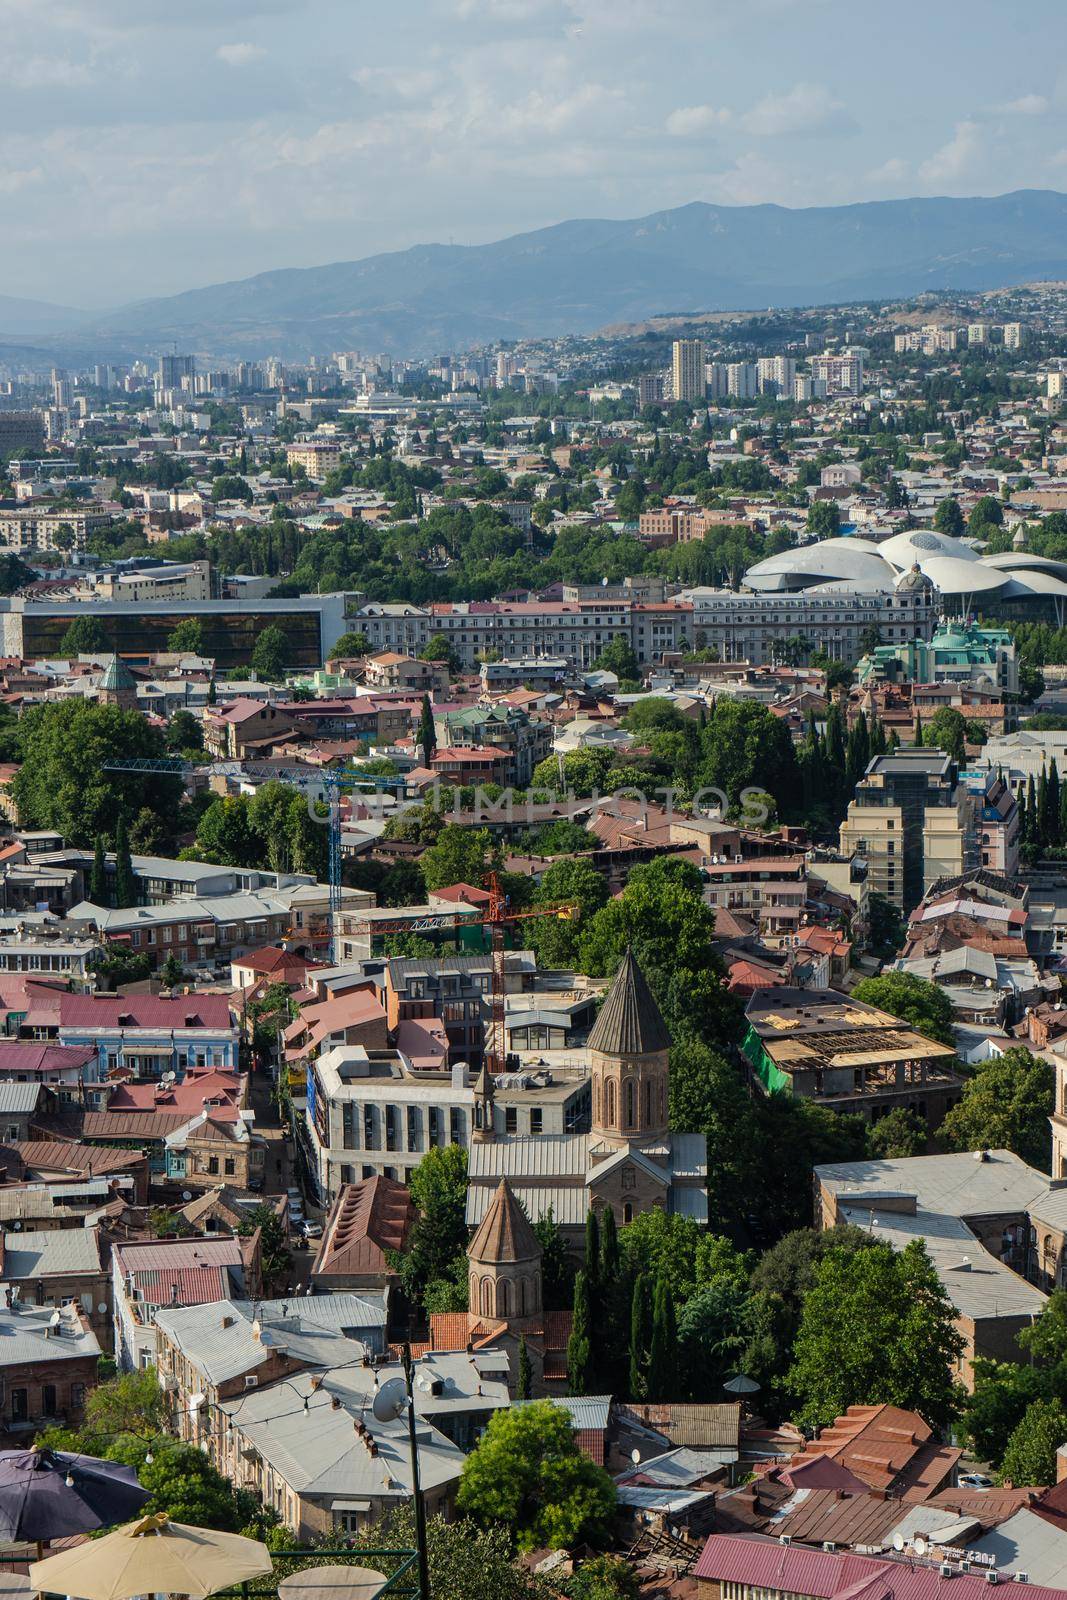 Tbilisi's overview from Narikala hill top by Elet